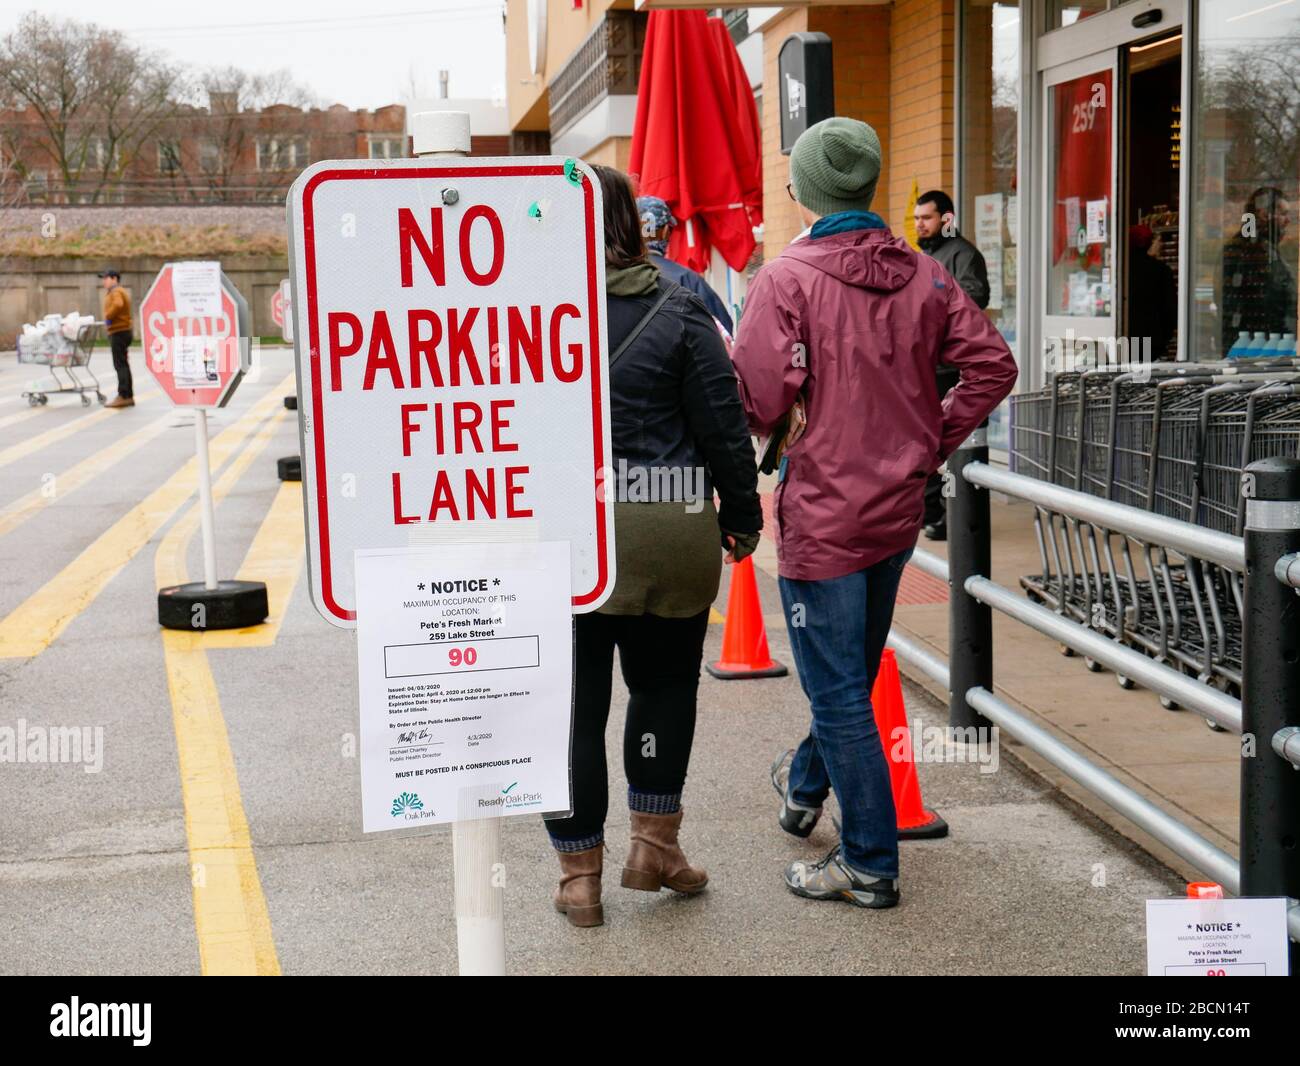 Oak Park, Illinois, USA. 4th April, 2020. An emergency occupancy notice outside a grocery store in this western suburb of Chicago. Stock Photo